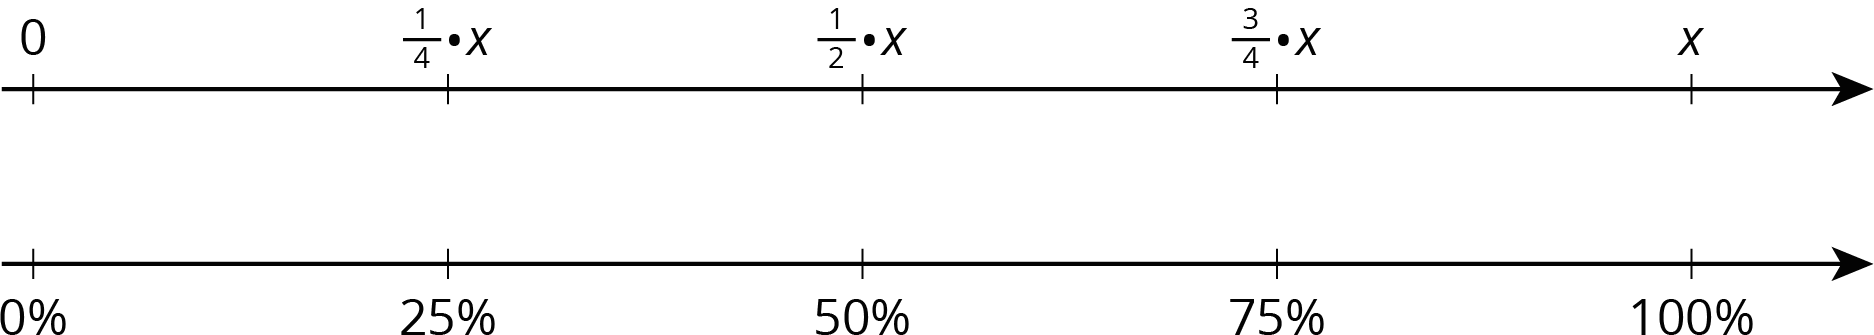 A double number line with 5 evenly spaced tick marks. The tick marks on the top number line are labeled 0, one fourth times x, one half times x, three fourths times x, and x. The tick marks on the bottom number line are labeled 0 percent, 25 percent, 50 percent, 75 percent, and 100 percent.